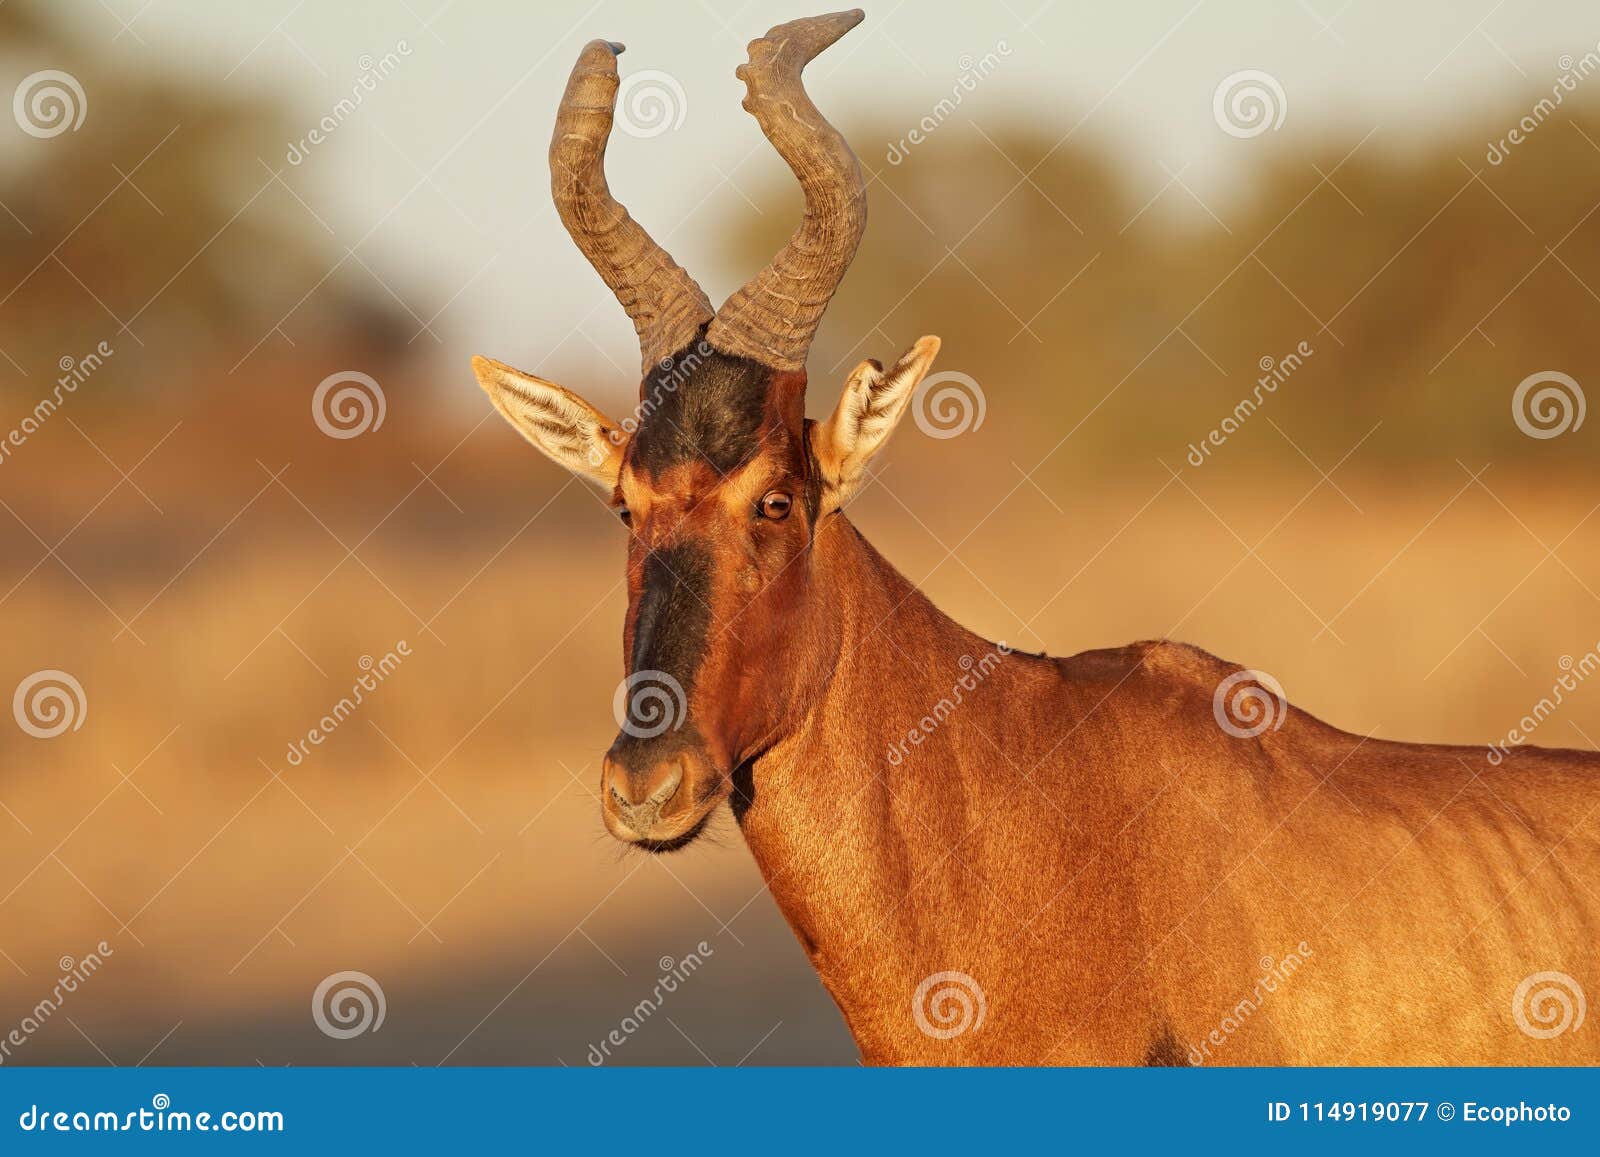 red hartebeest portrait - south africa